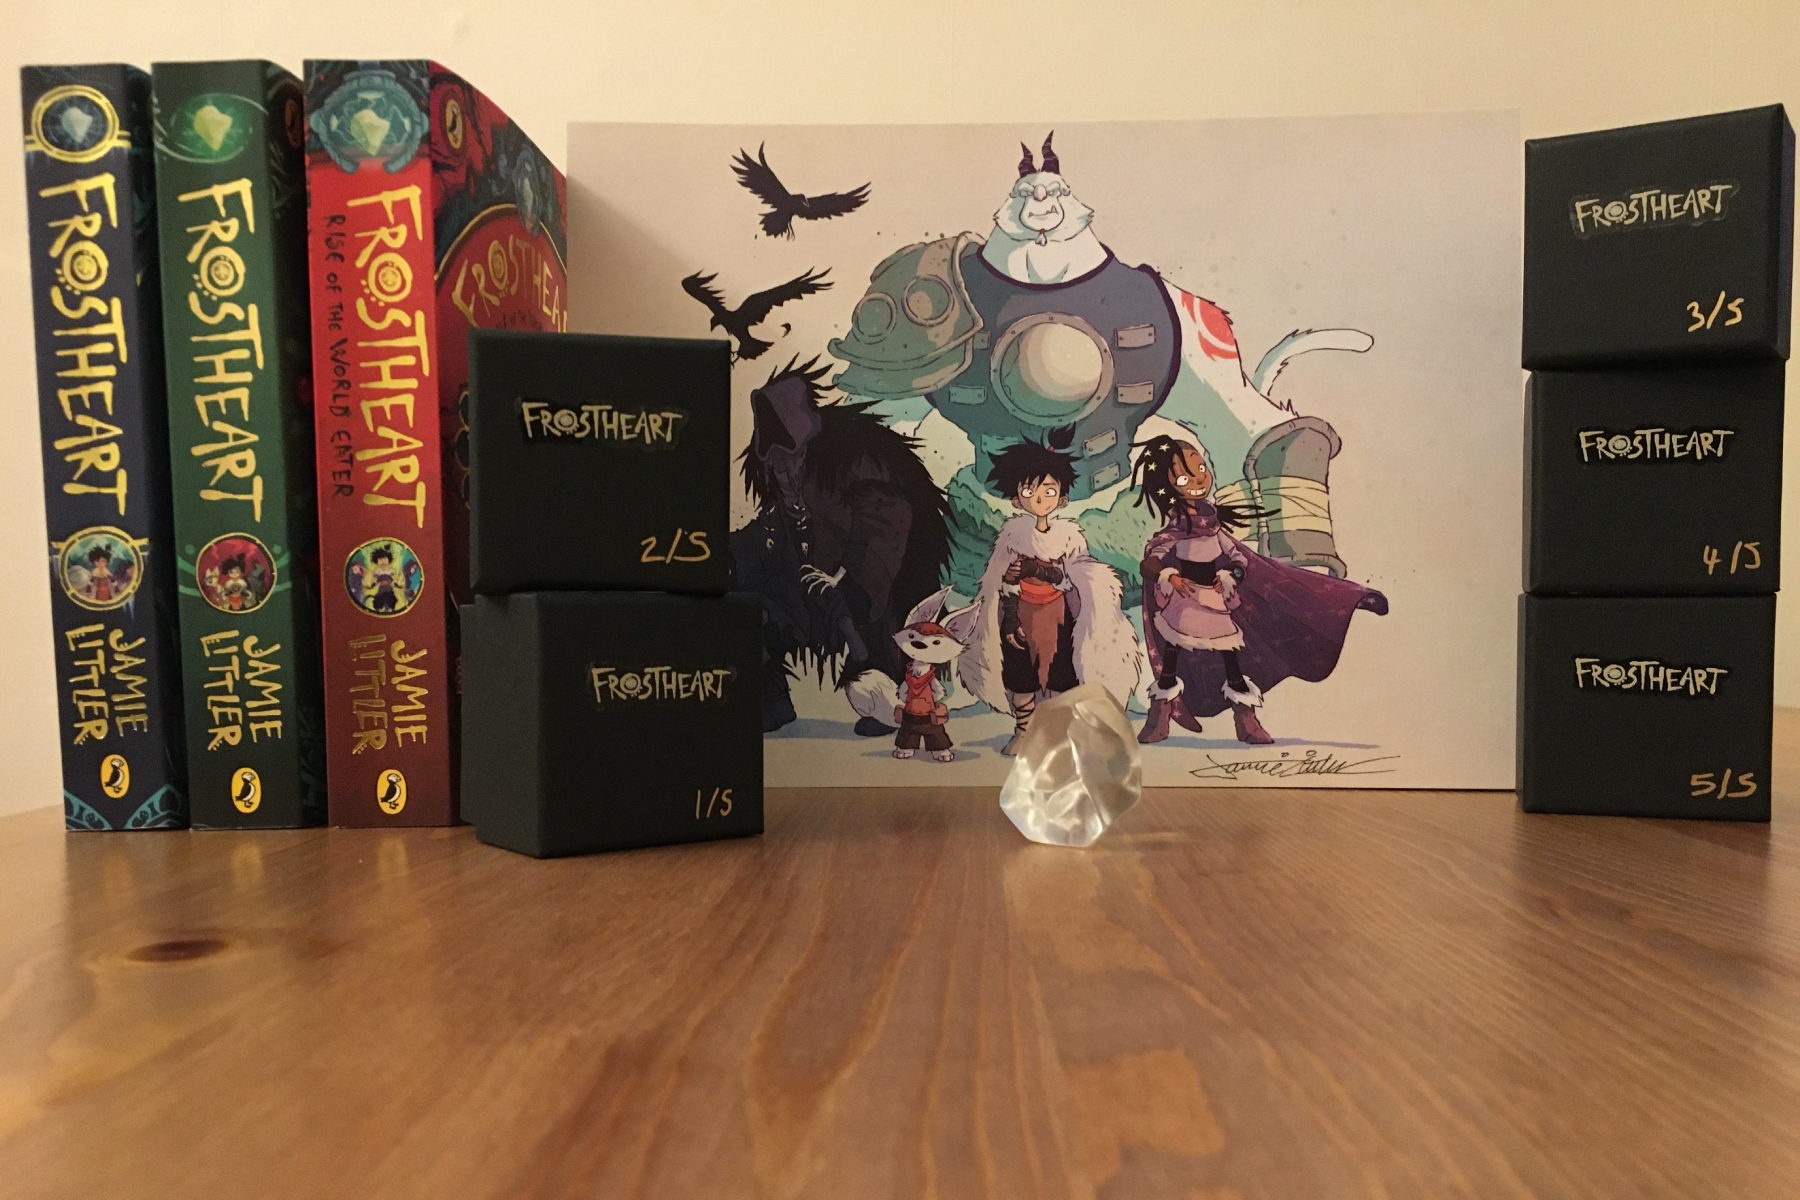 A photo showing a frost-heart stone, the three books in the series and a signed print on a wooden table